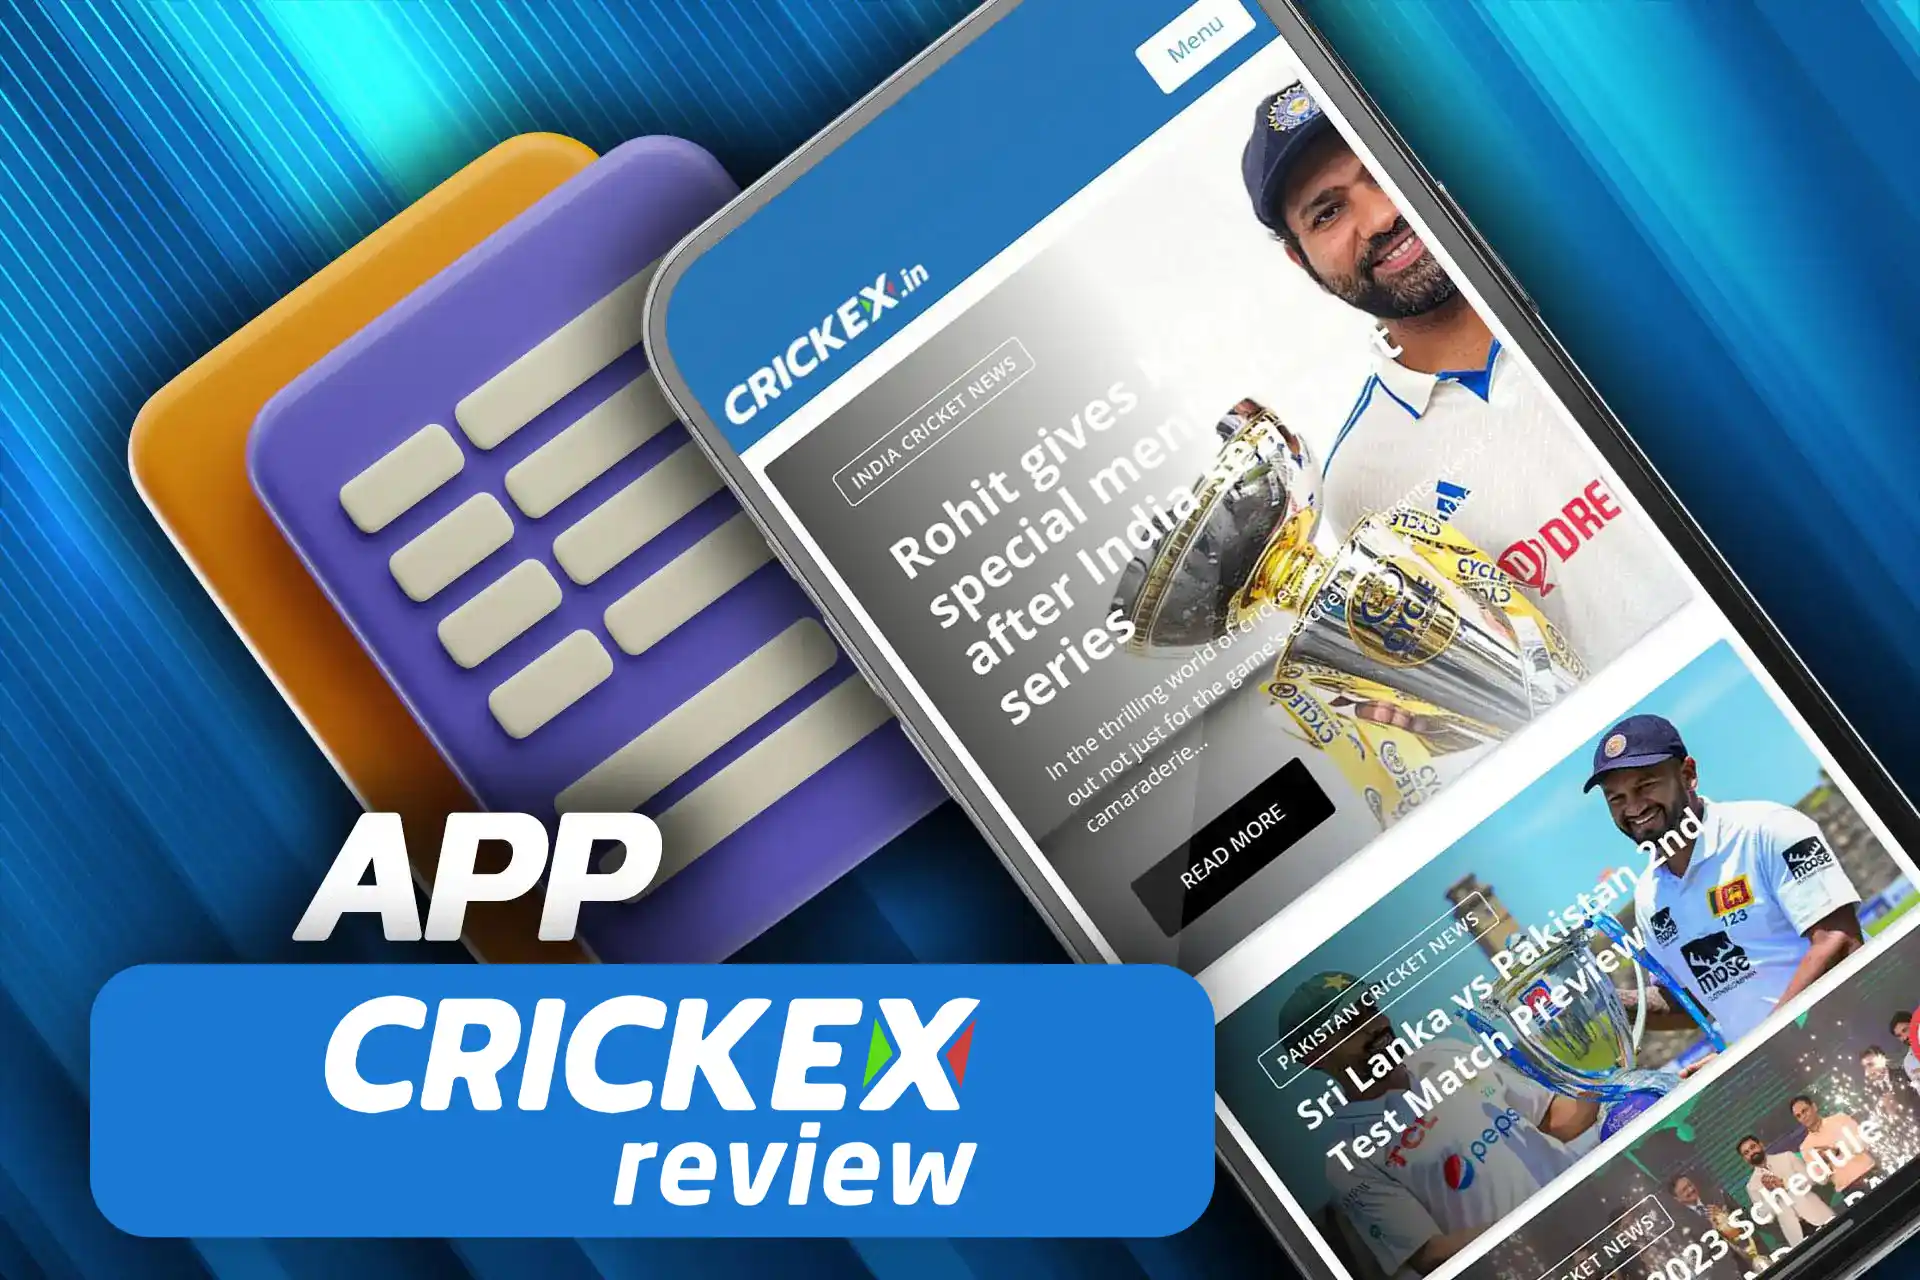 Visit the Crickex blog to know all the latest news of the sports universe.